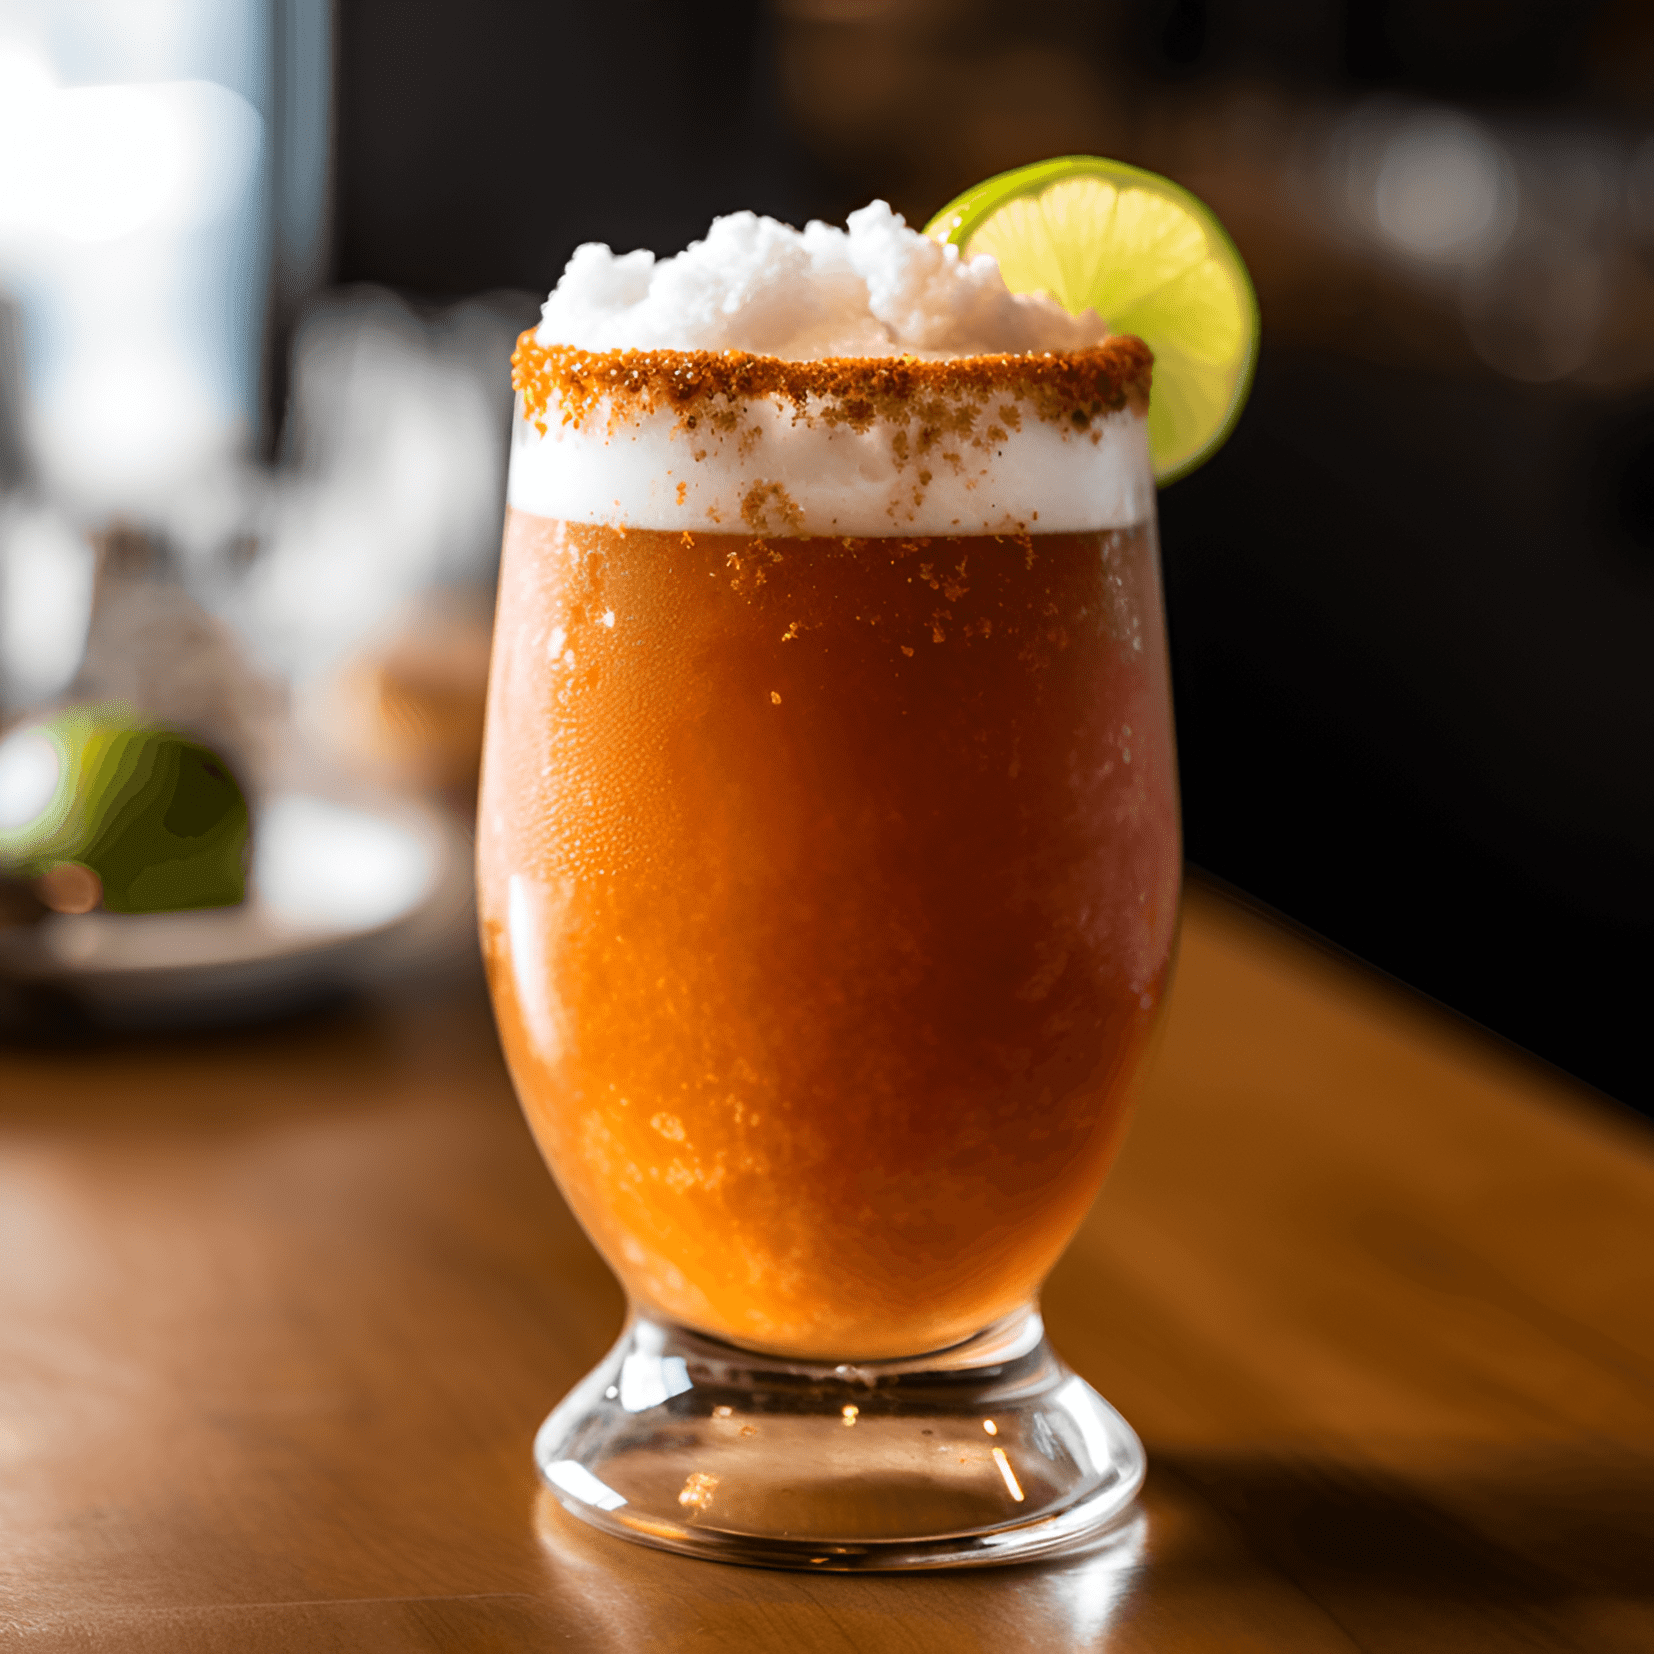 Michelada Cocktail Recipe - The Michelada has a unique, tangy taste that combines the flavors of beer, lime, and spices. It is savory, slightly spicy, and has a hint of saltiness. The overall taste is refreshing and invigorating.